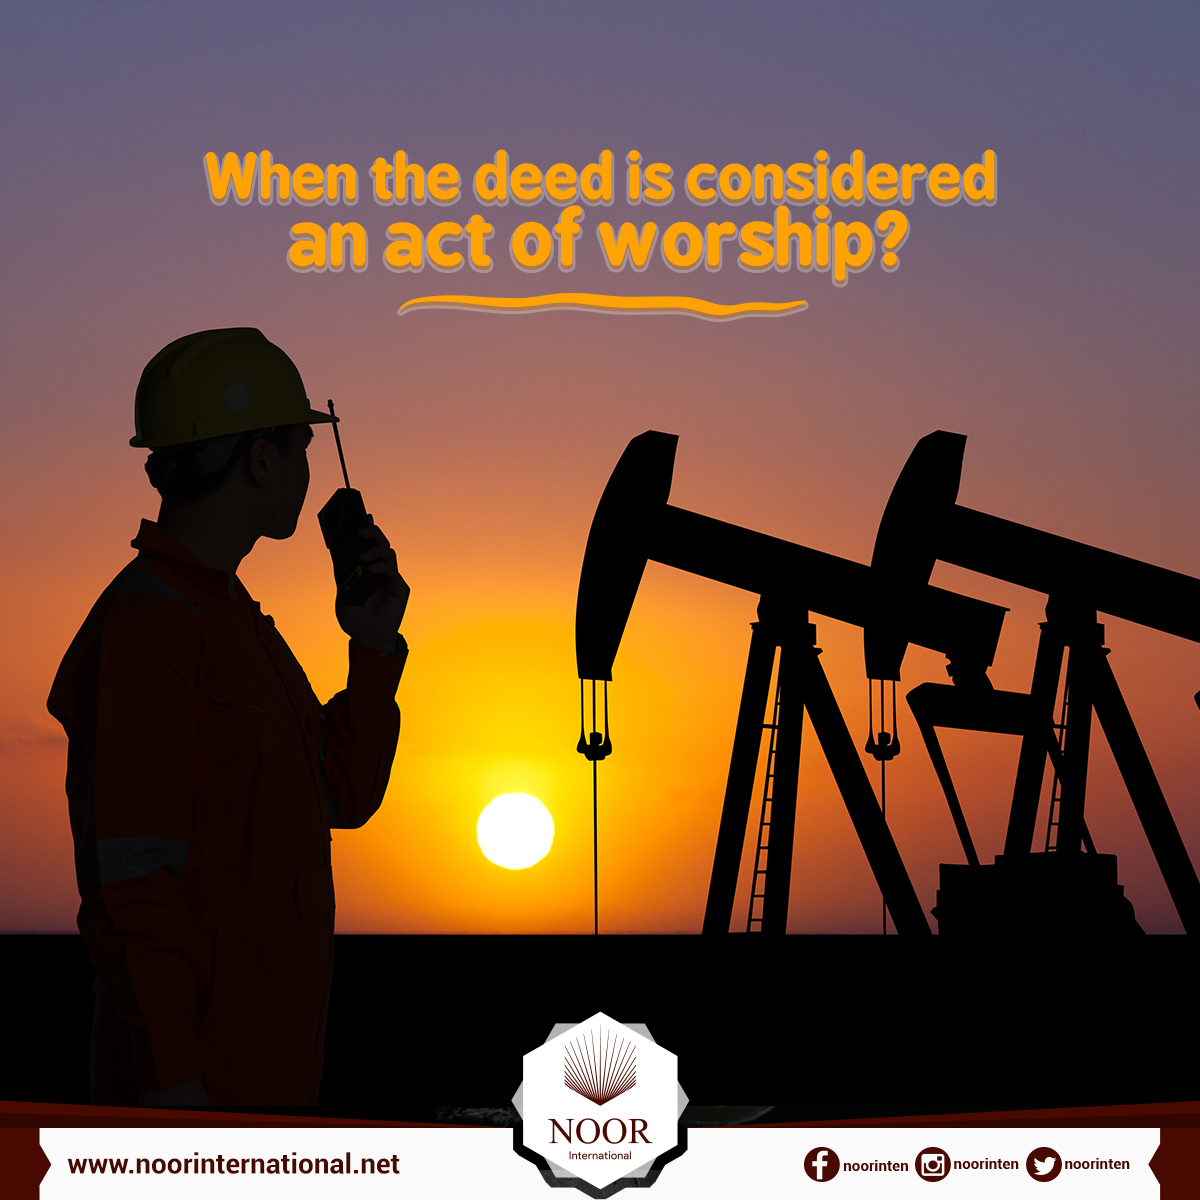 When the deed is considered an act of worship?